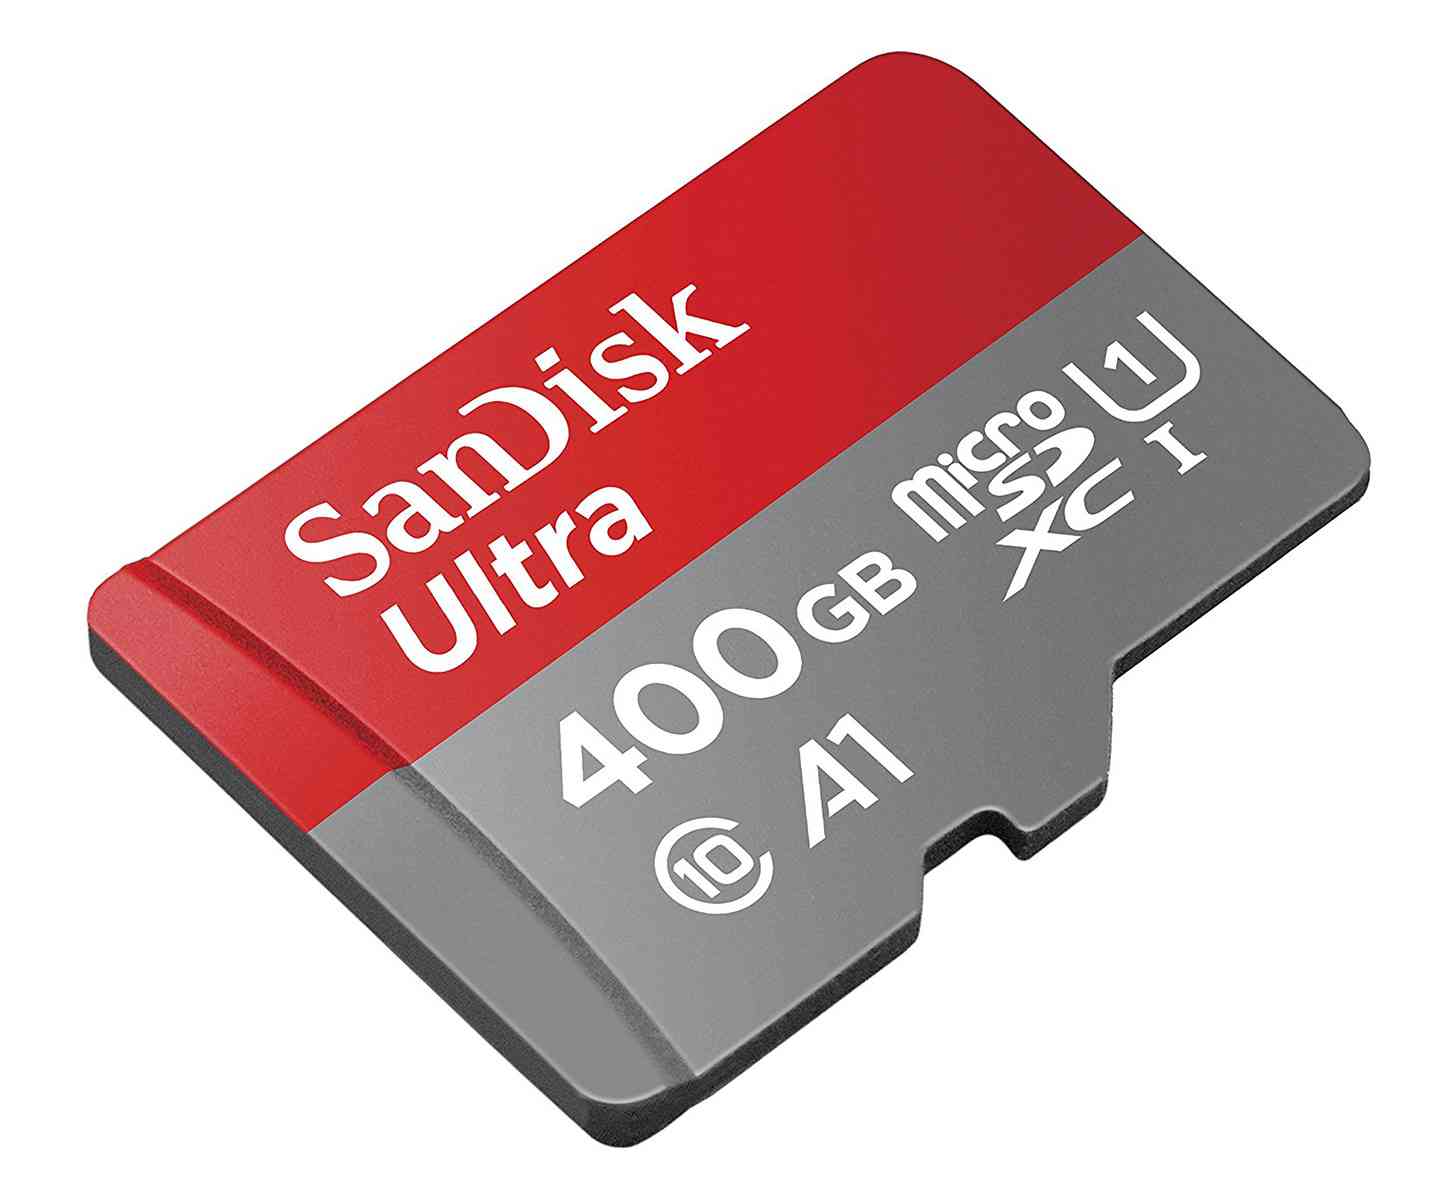 SanDisk 400GB microSD card official large